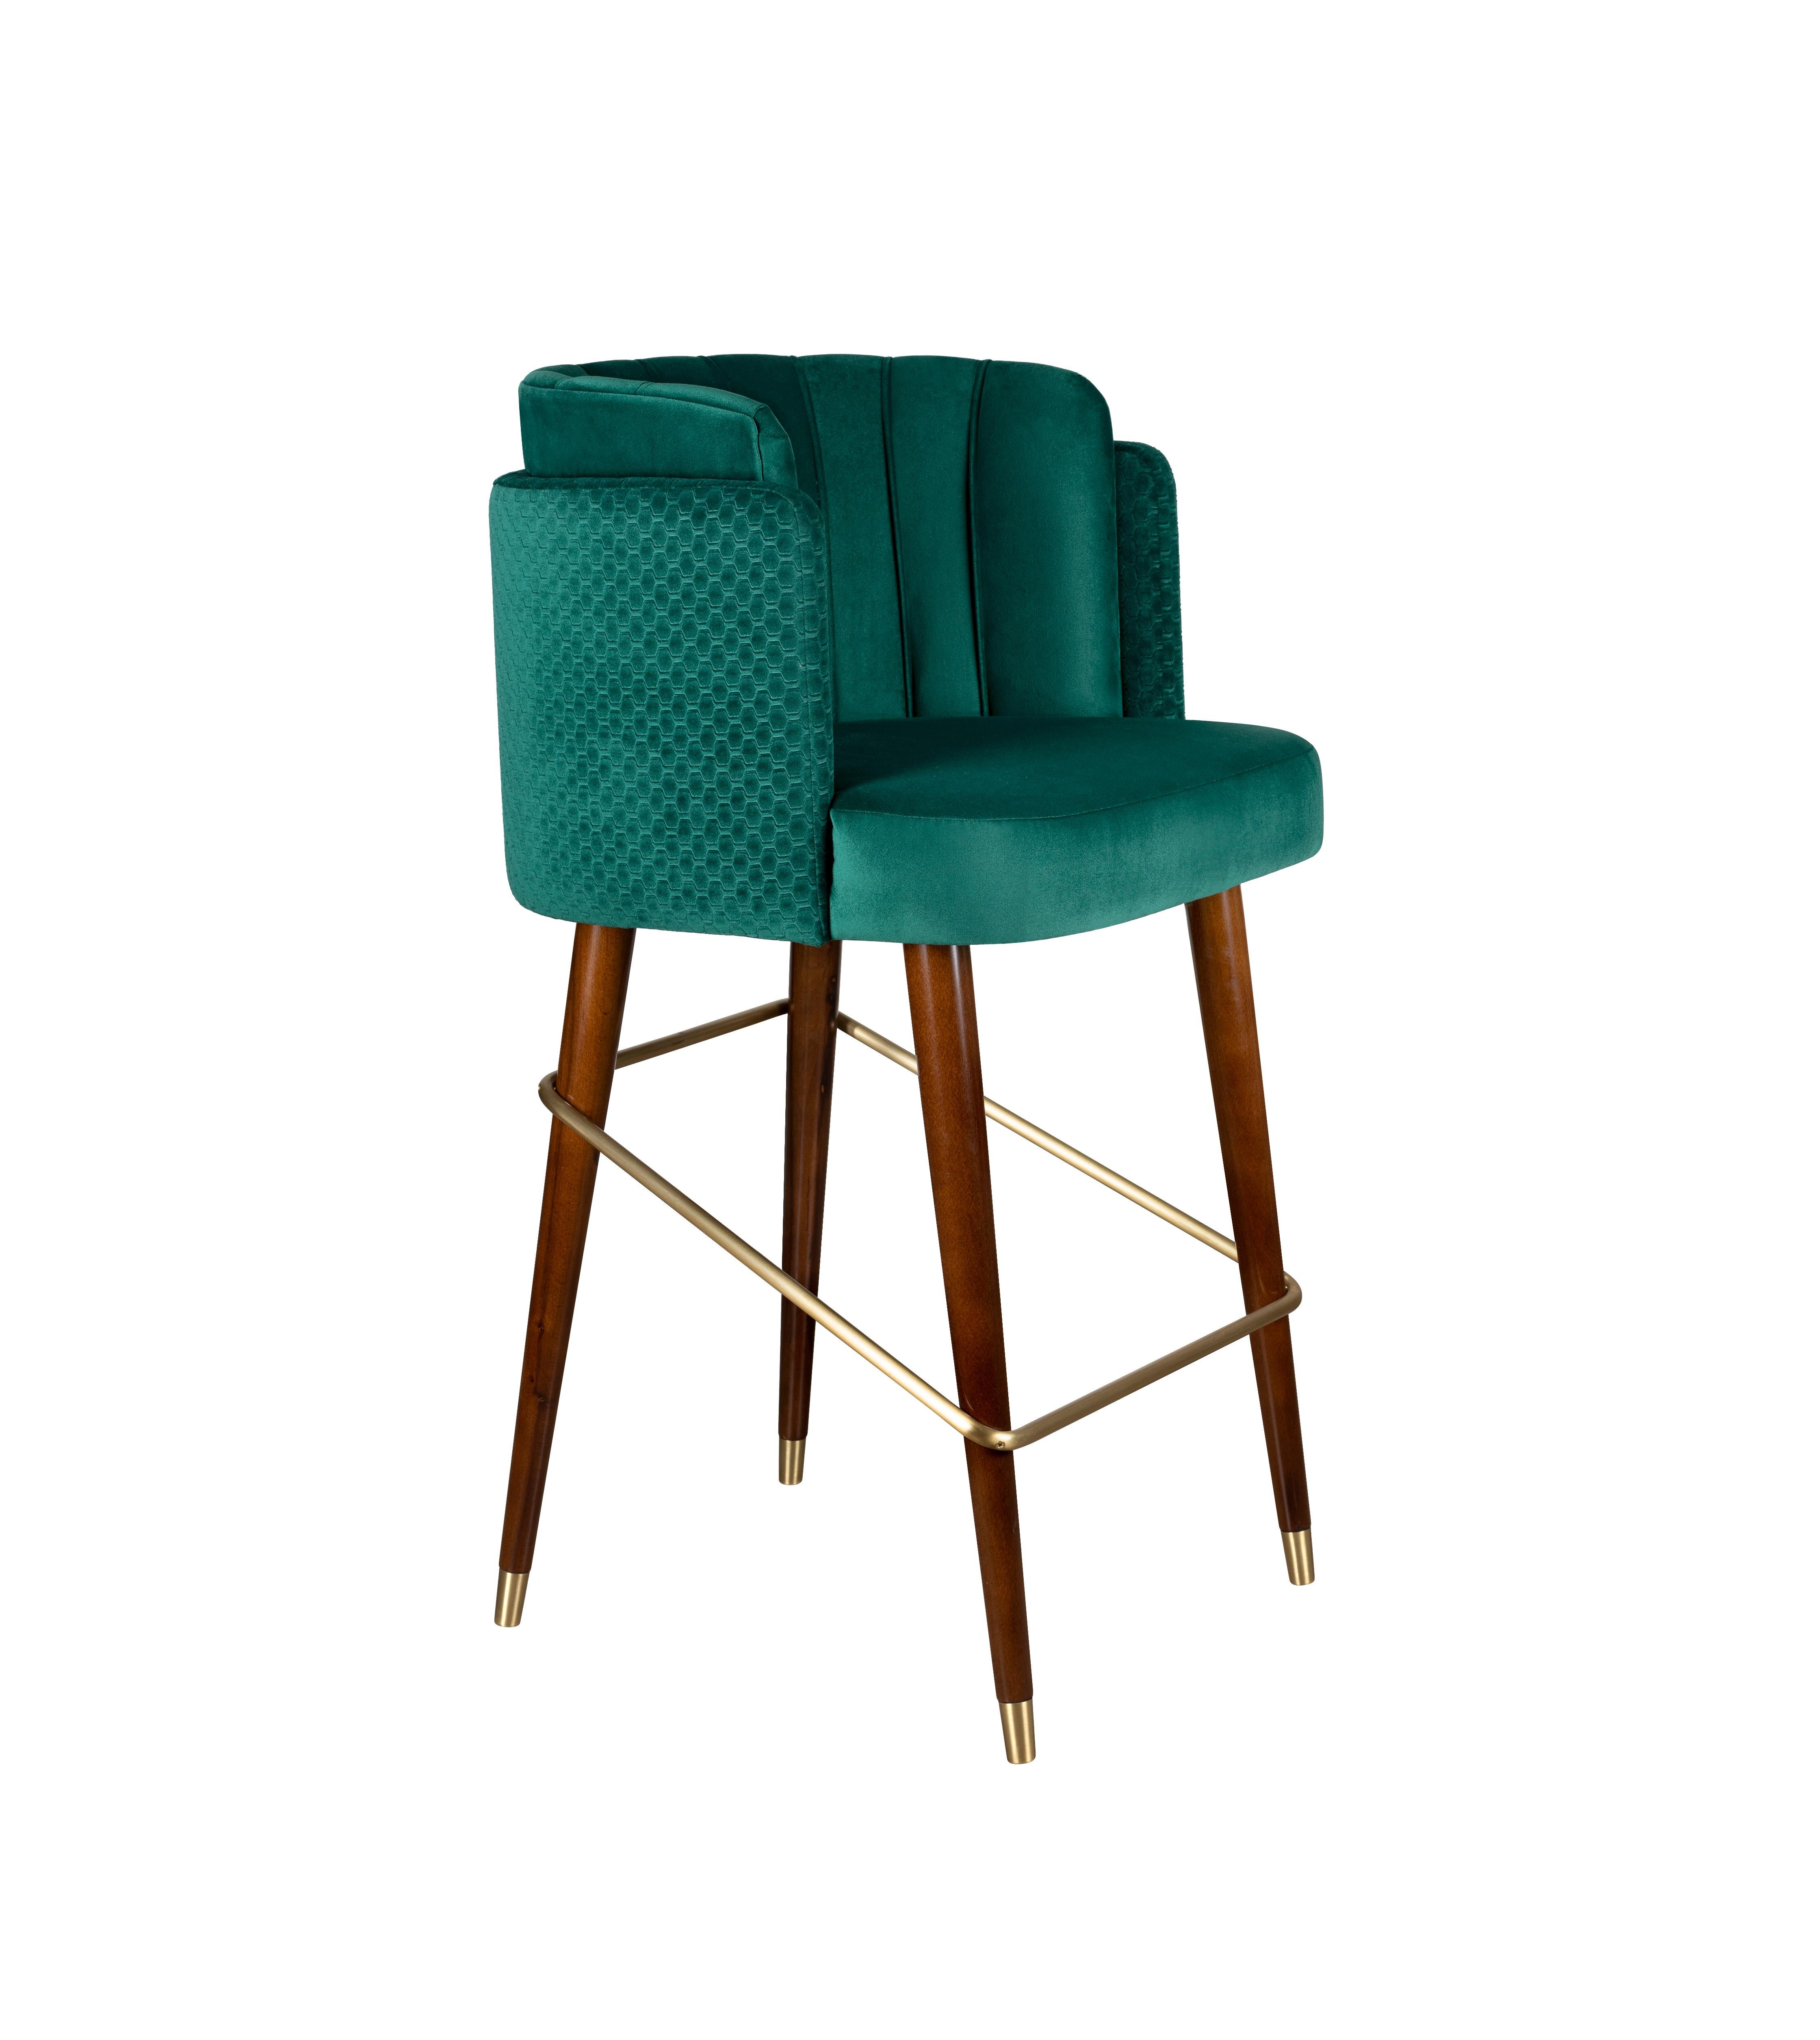 The Anita Mid-Century Modern bar chair is a piece where lush, beauty and delicacy hide the fierceness and unbridled sensuality of one of the 1950s iconic personalities: Anita Ekberg. This beautiful chair has an exquisite velvet upholstery supported